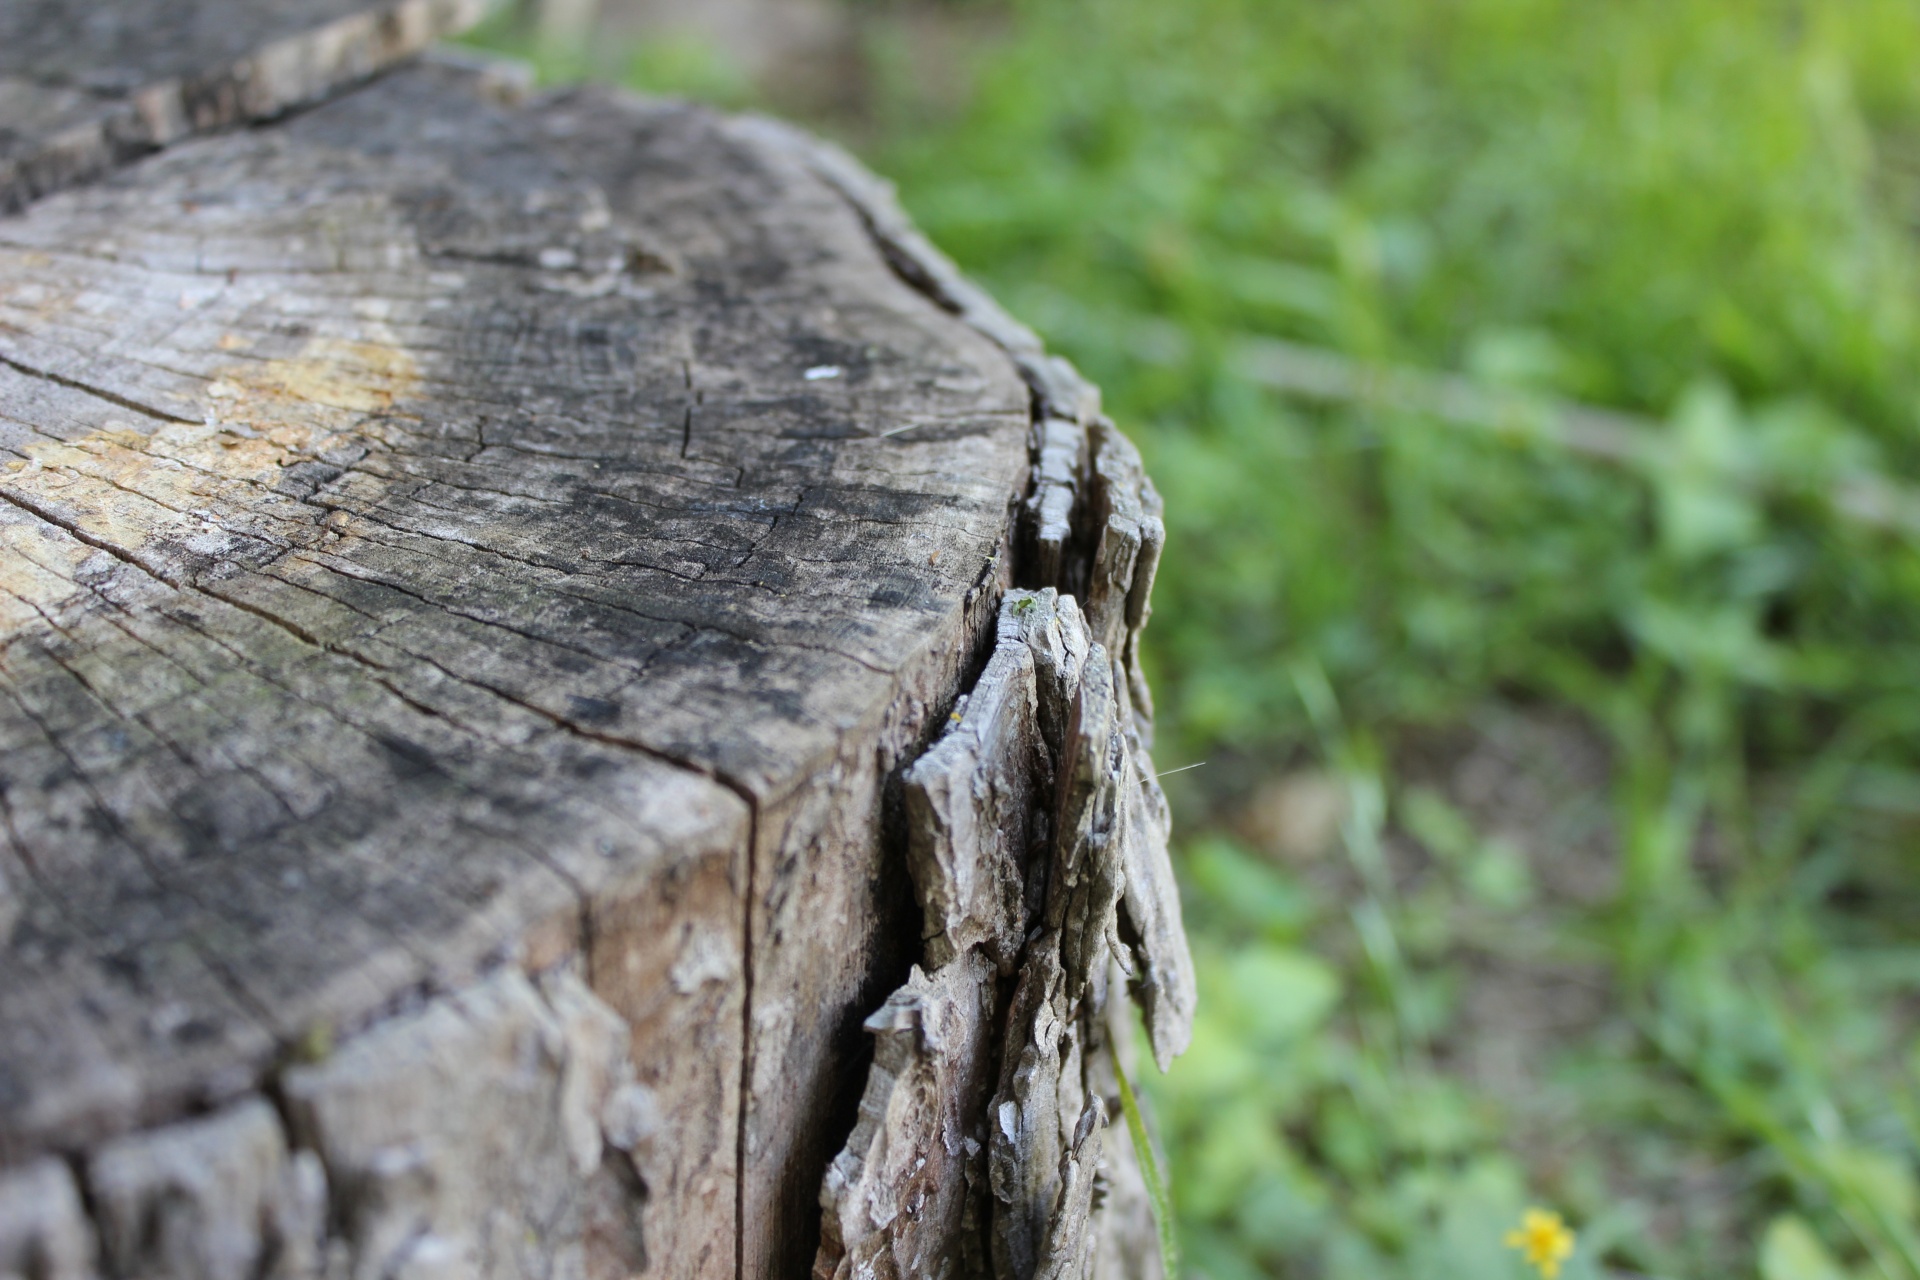 I like the way the camera focused on the creamy, grey-white center of the stump. It also shows the detail of the bark, but the background is blurred.